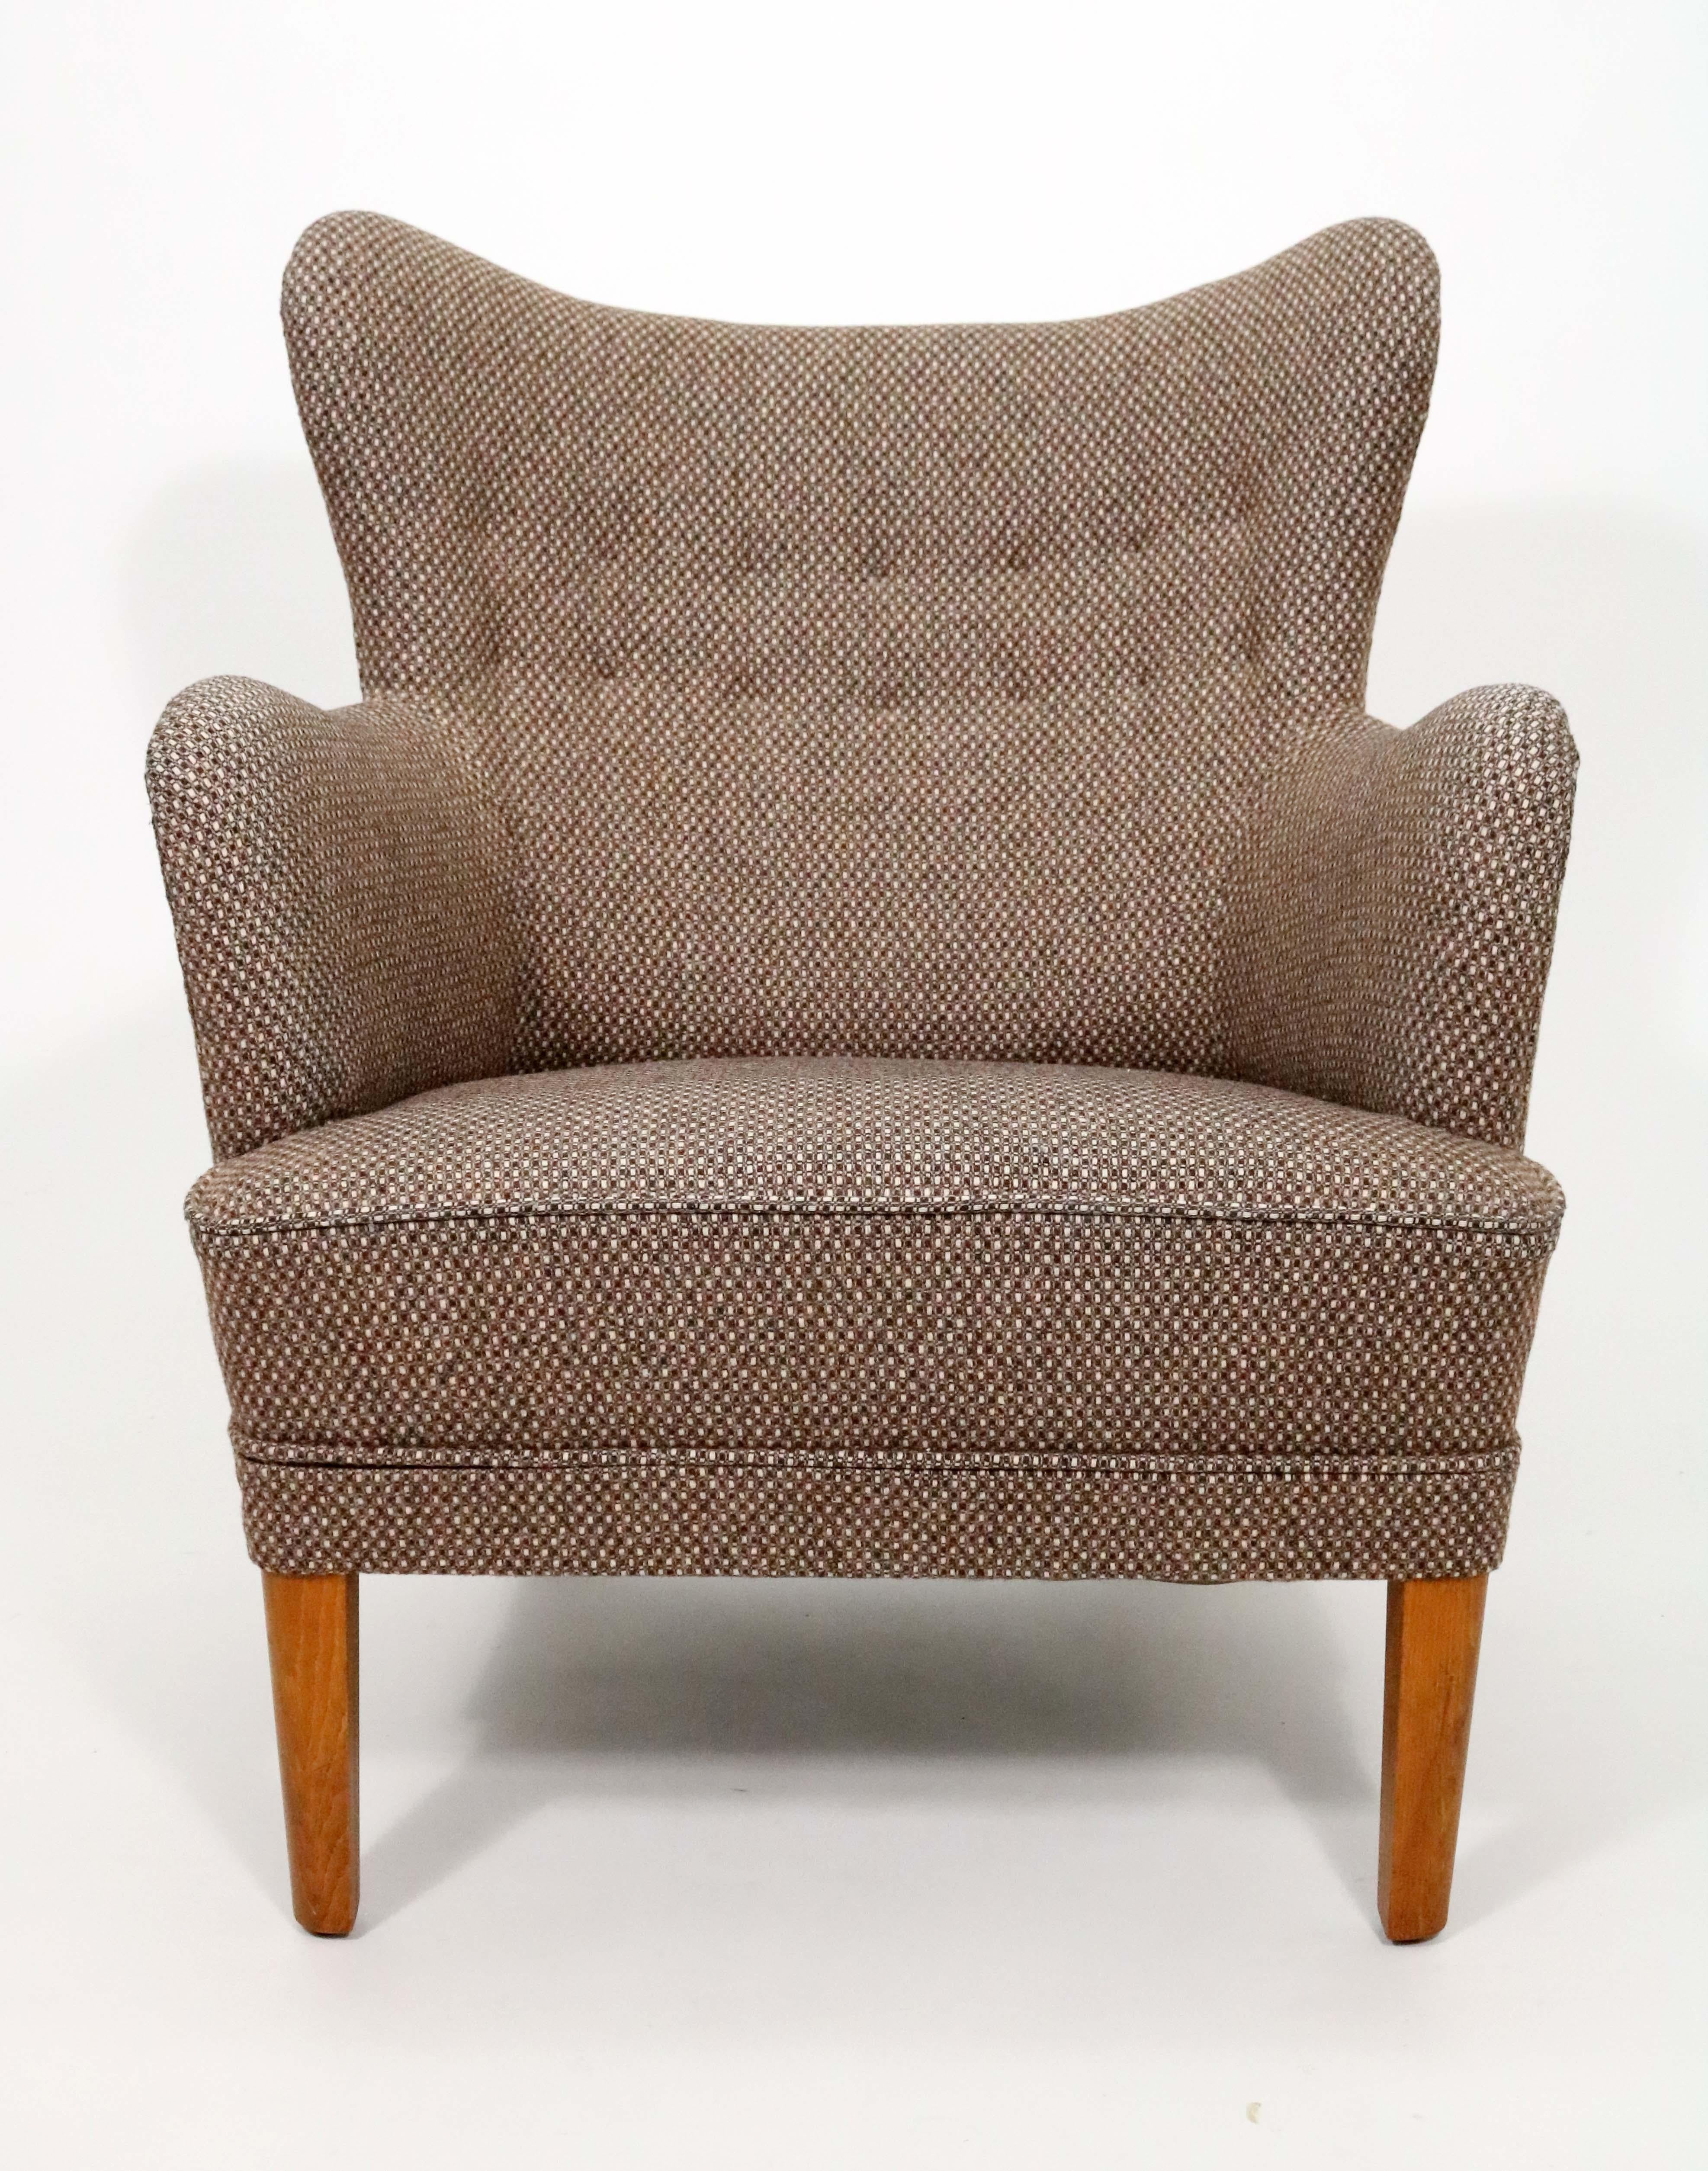 A handsome mid-century Scandinavian chair reflective of Carl Malmsten's take on the classic wingback chair. 

Heavy wool upholstery.